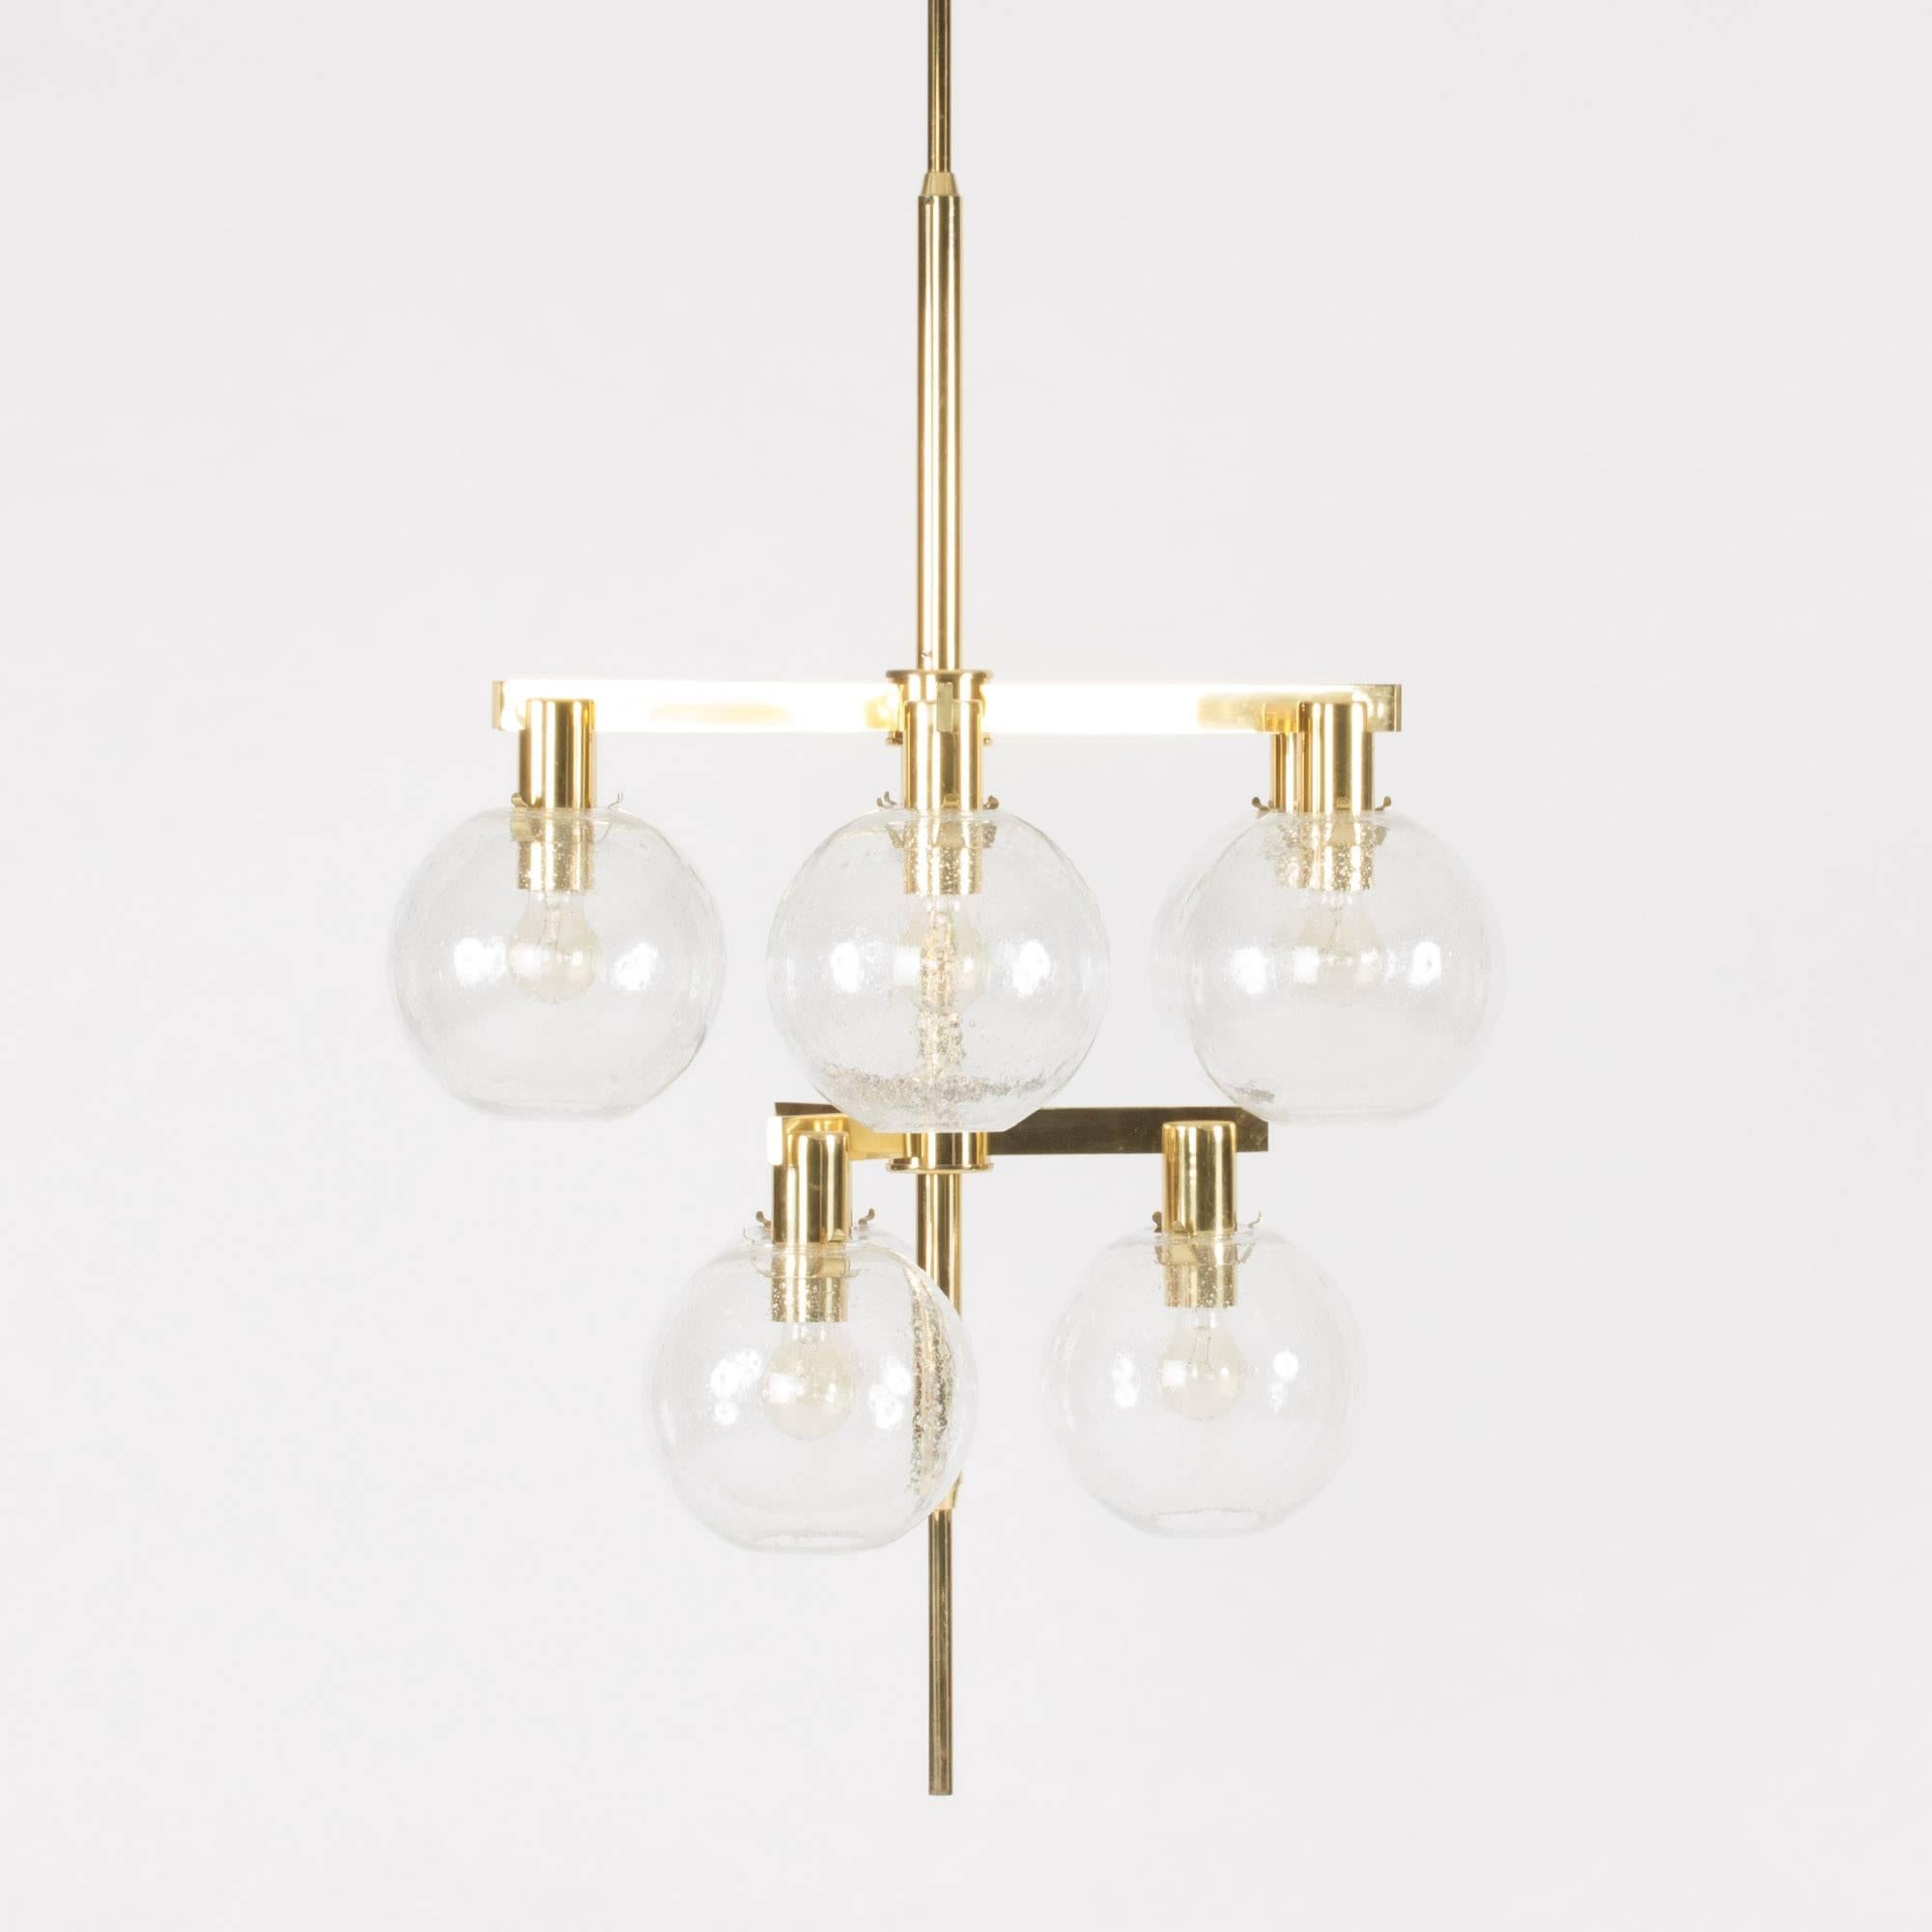 Striking brass chandelier by Hans-Agne Jakobsson with nine glass shades set at two heights. The shades have enclosed air bubbles that make them very decorative both lit and unlit.

We will adjust the height of the pole to the desired measurements.